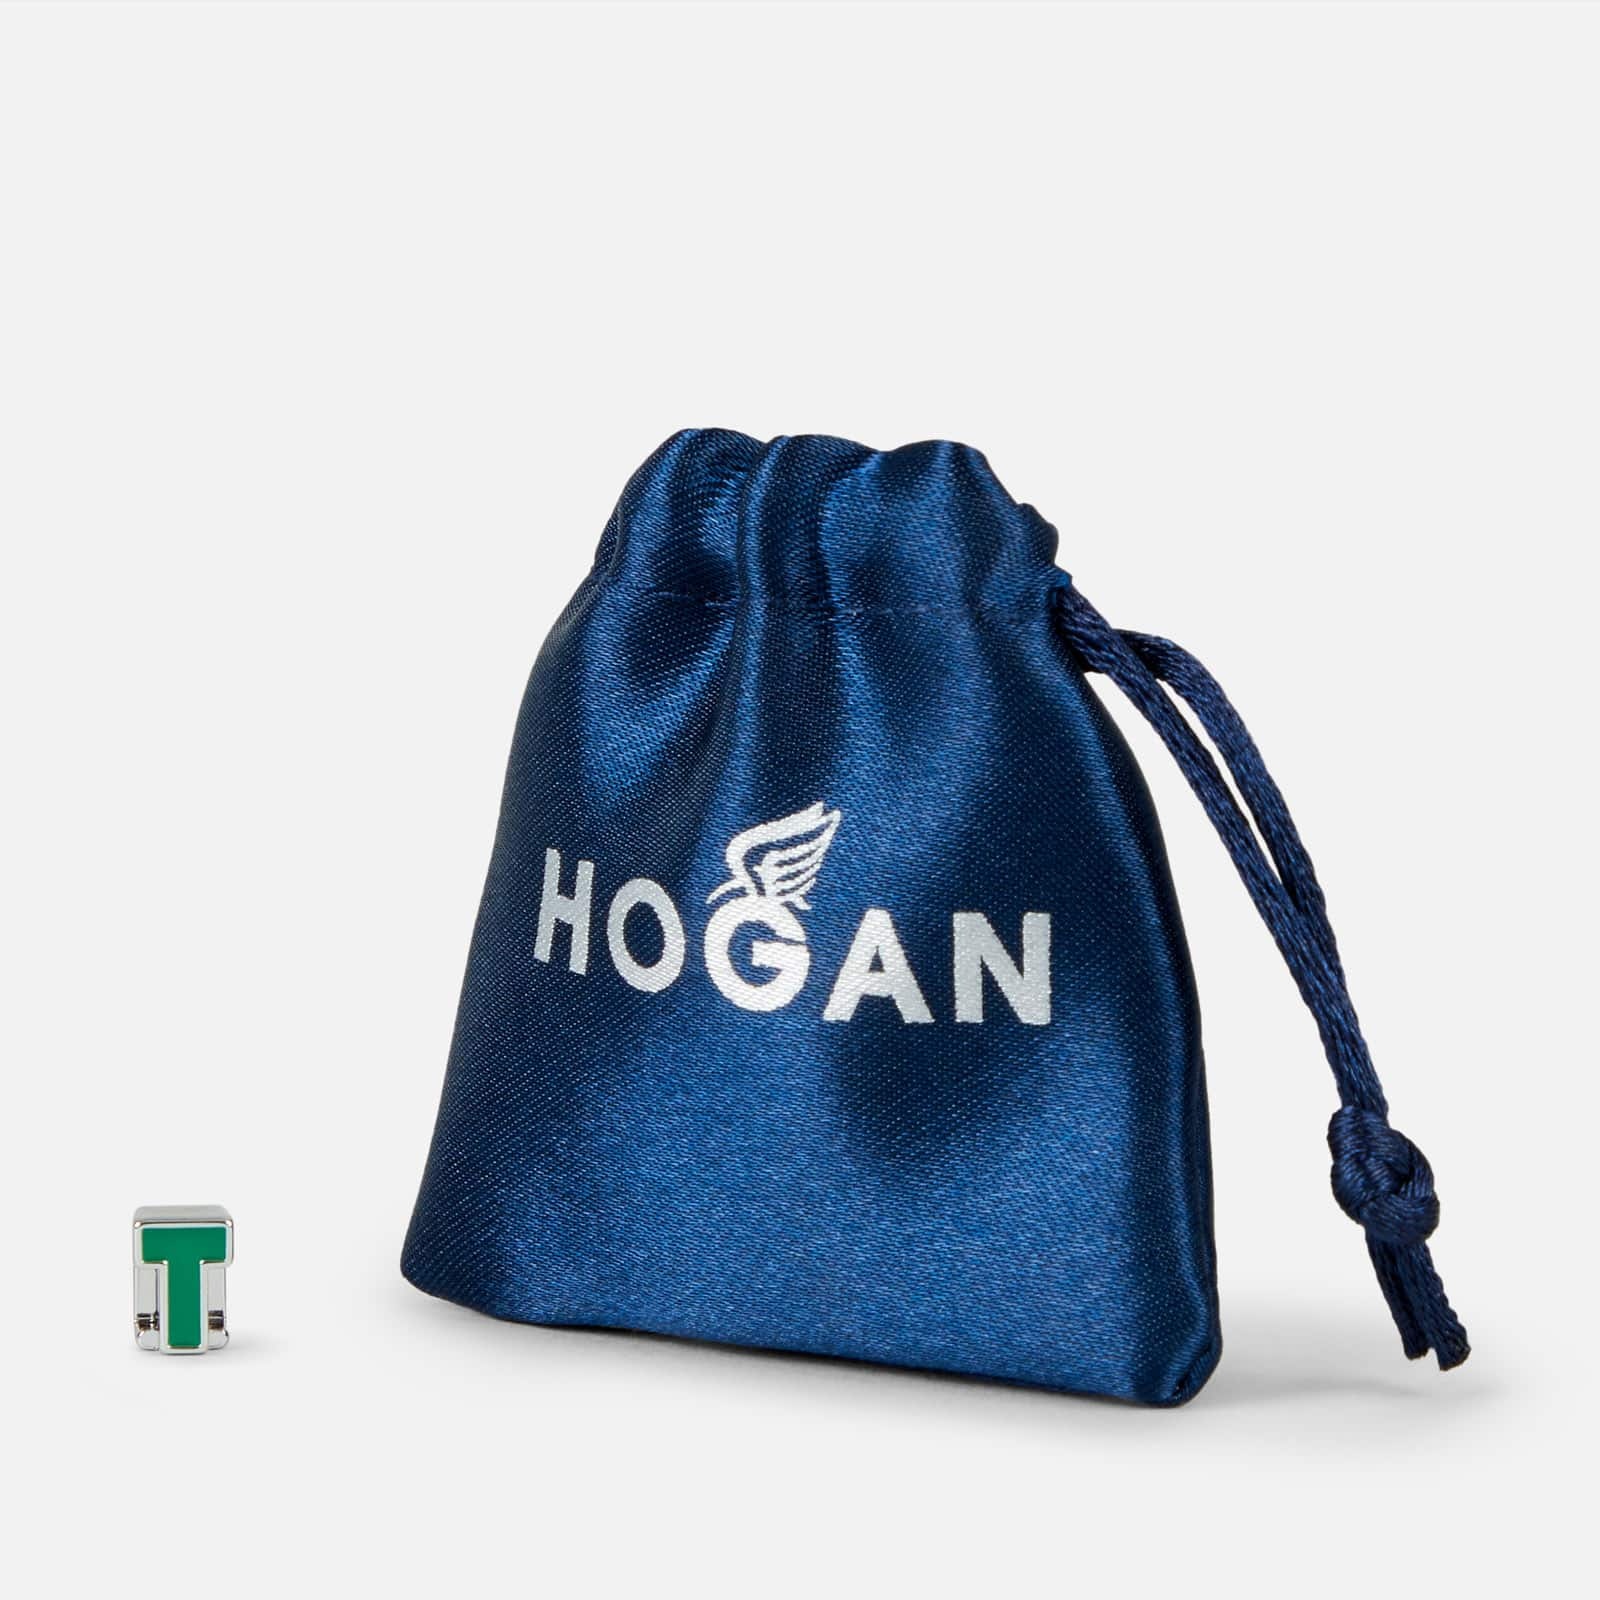 Hogan By You - Shoelace Bead Green Gold - 2